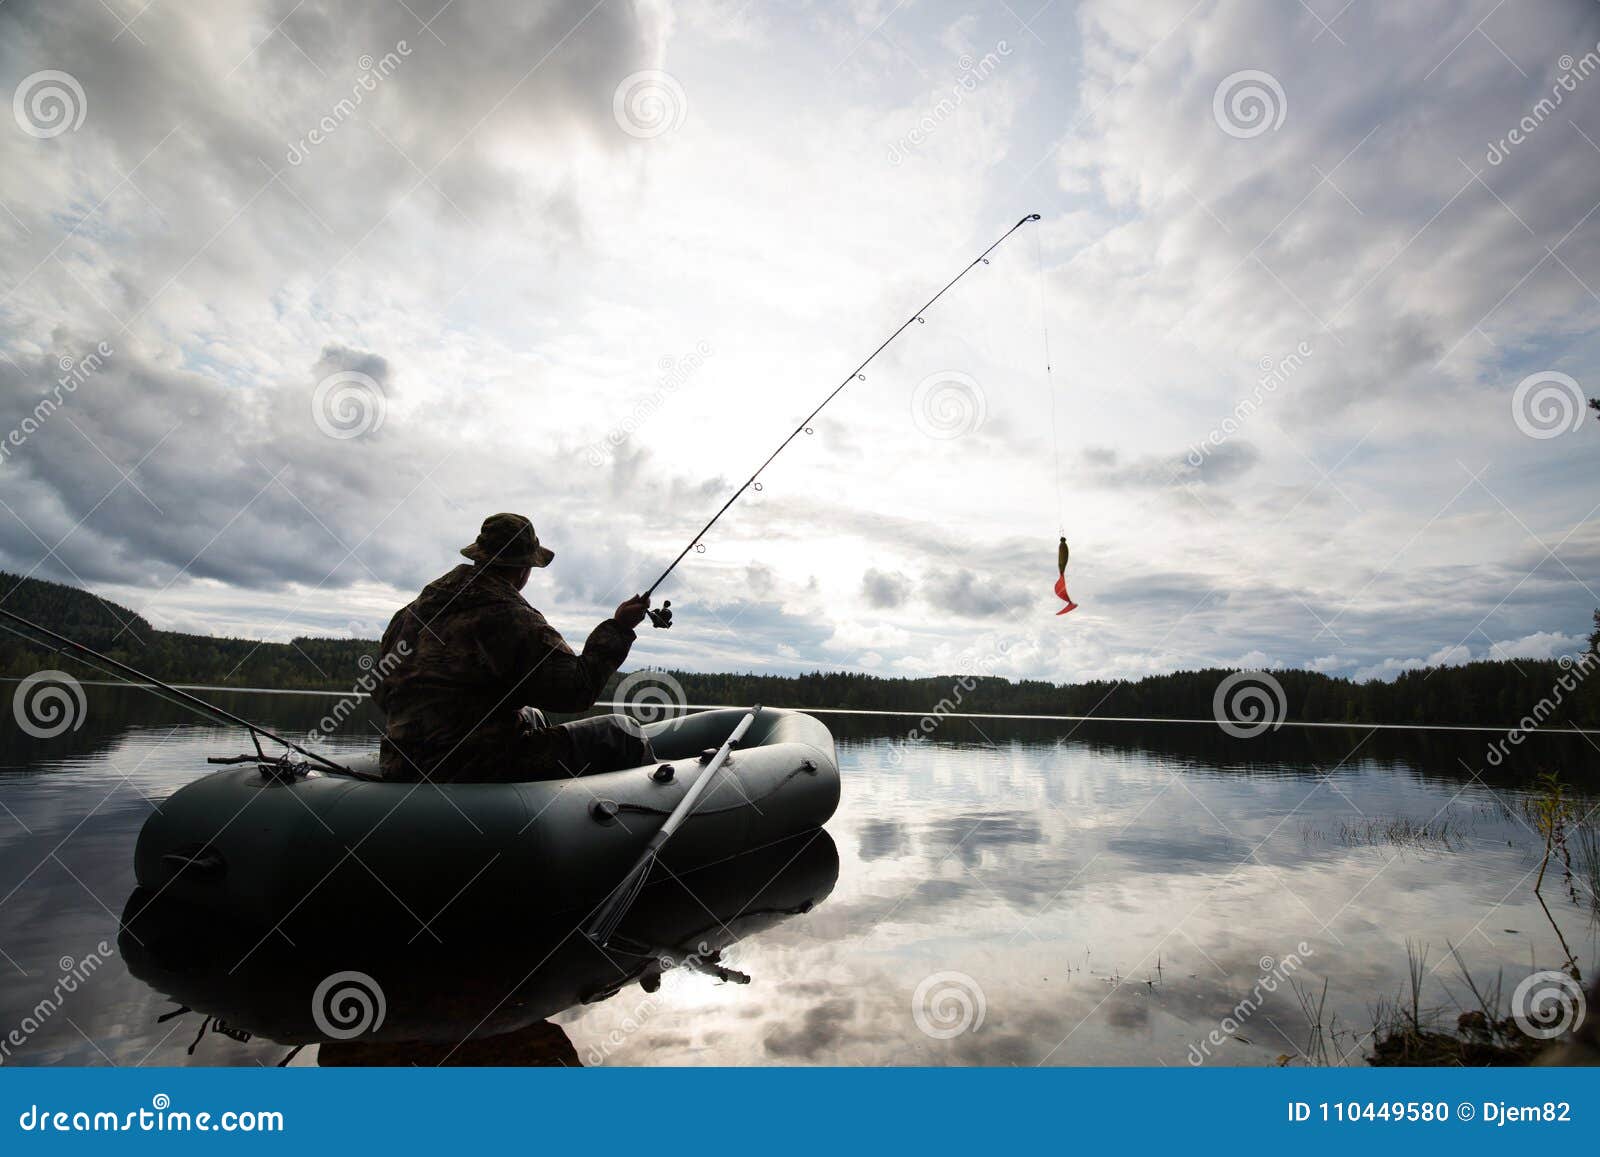 Man fishing from the boat stock photo. Image of hobby - 110449580